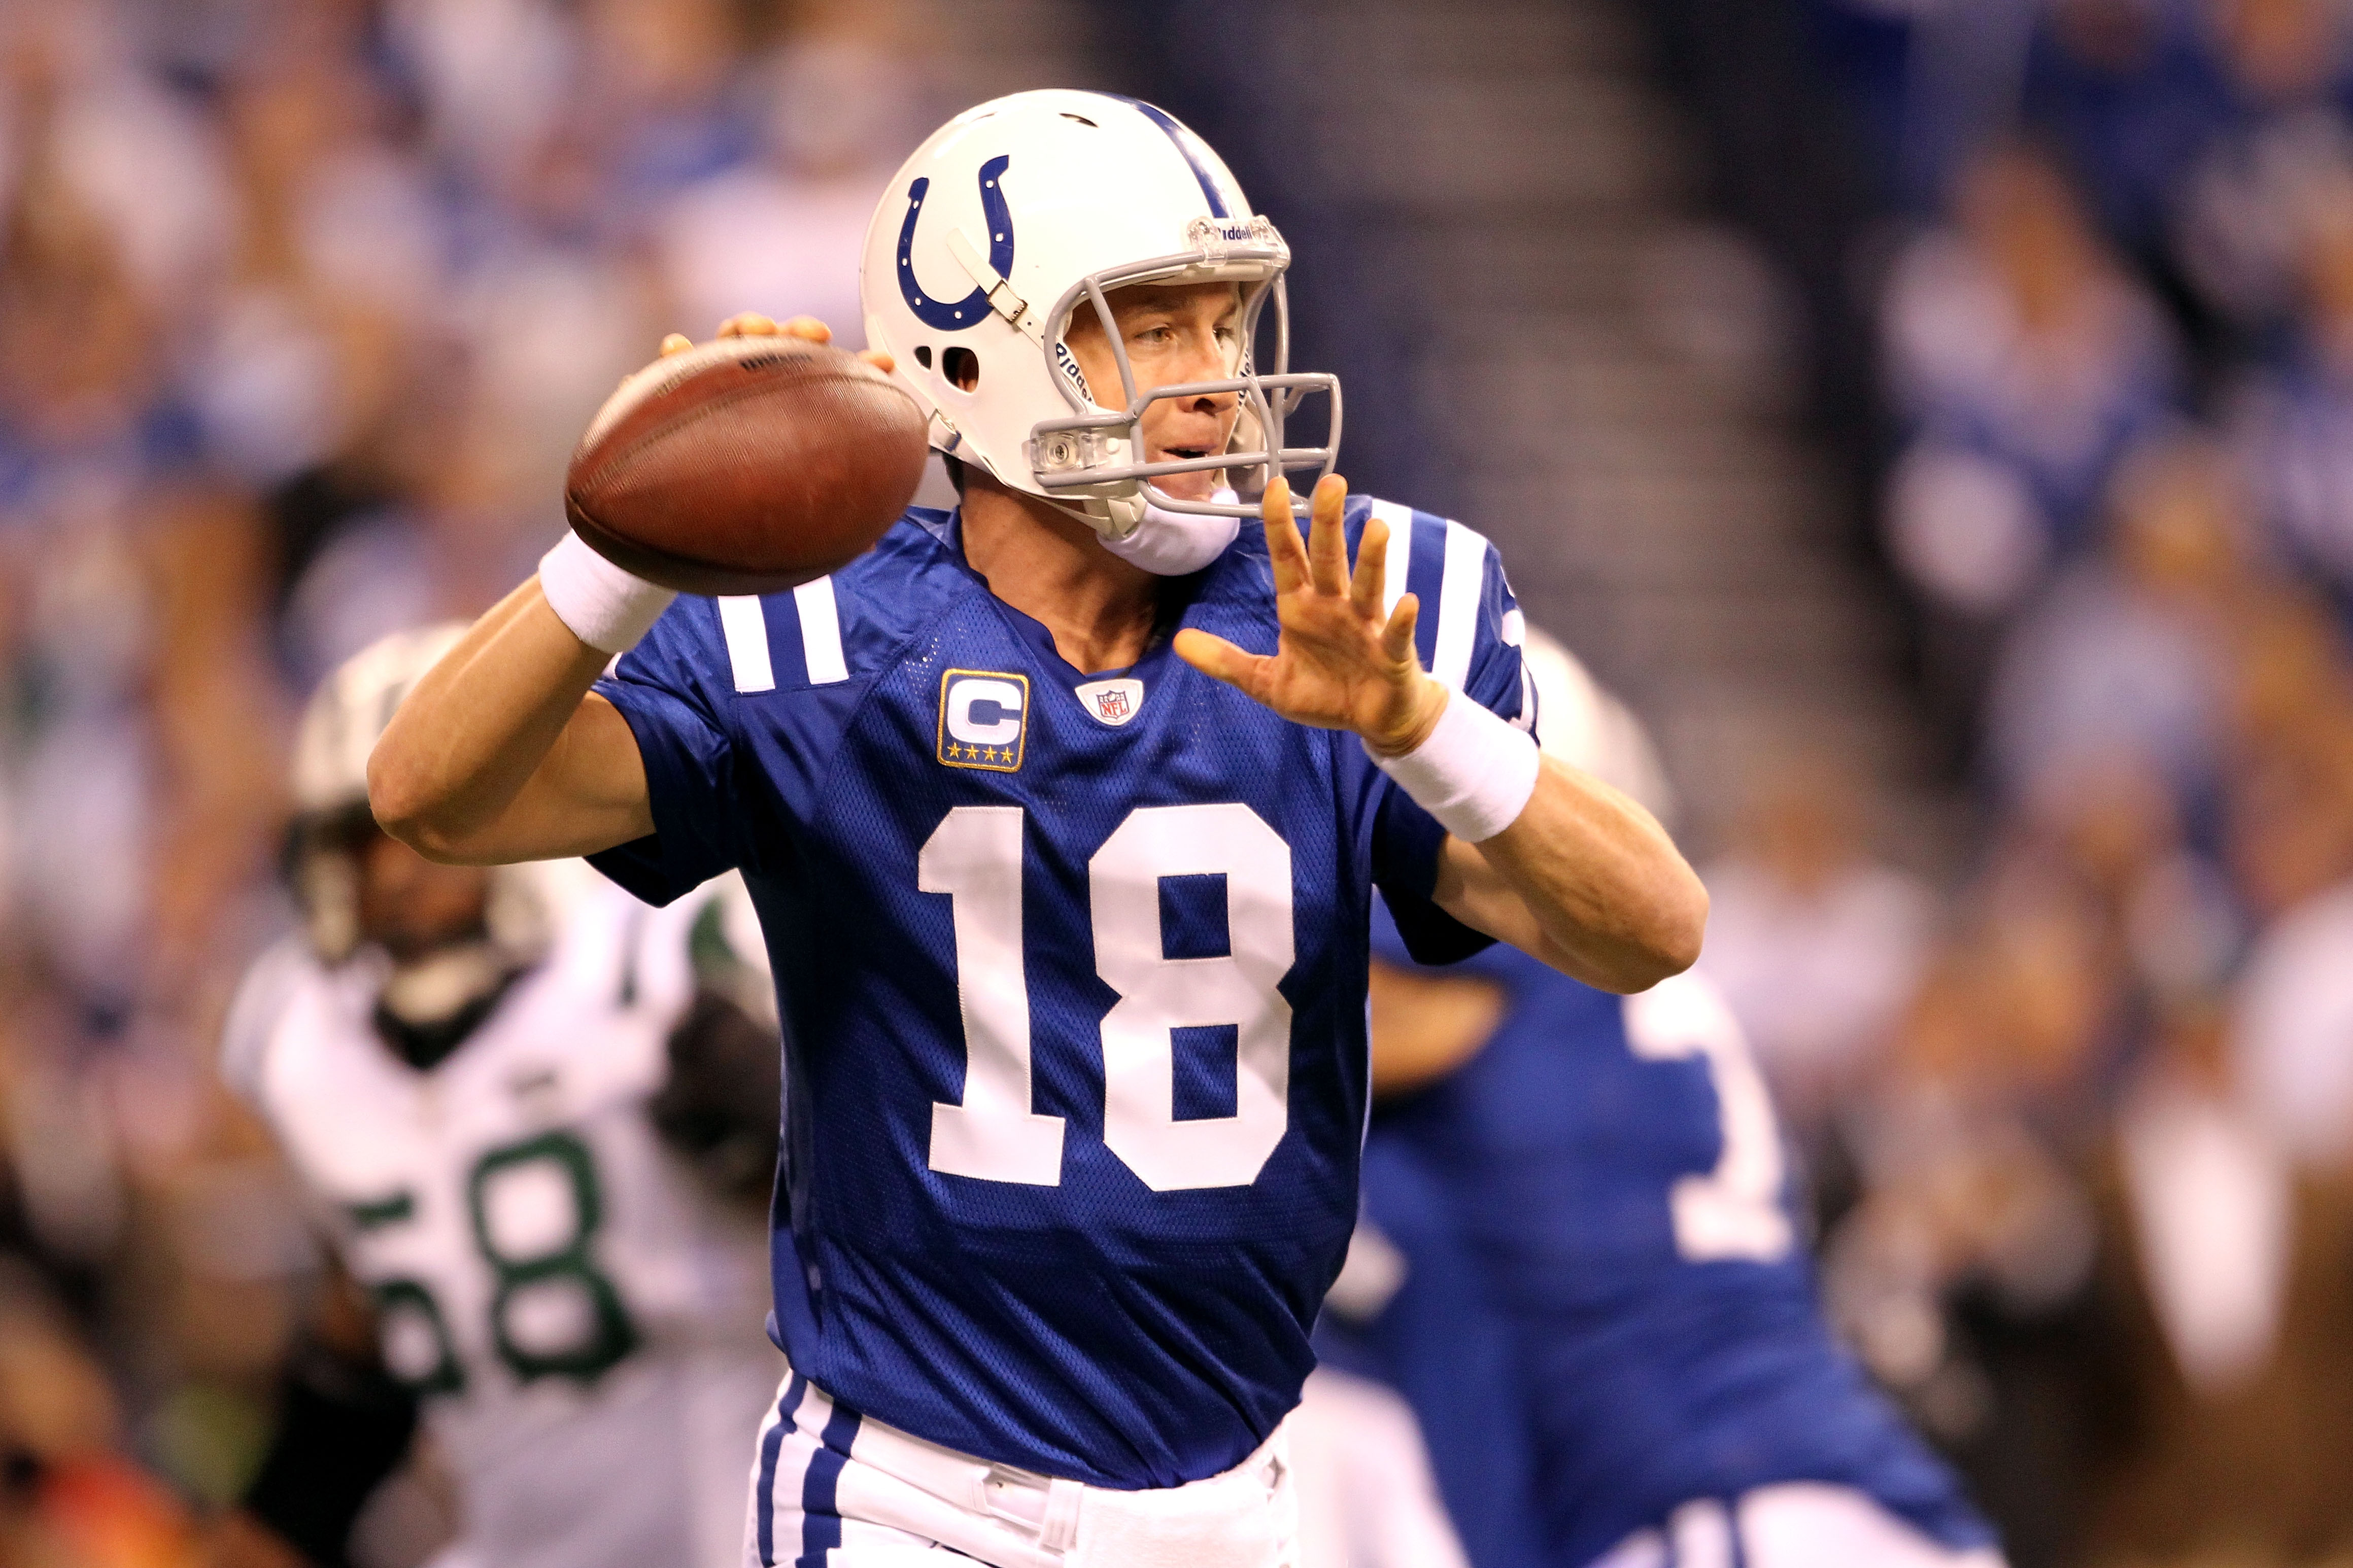 INDIANAPOLIS, IN - JANUARY 08:  Quarterback Peyton Manning #18 of the Indianapolis Colts passes the ball in the first quarter against the New York Jets during their 2011 AFC wild card playoff game at Lucas Oil Stadium on January 8, 2011 in Indianapolis, I